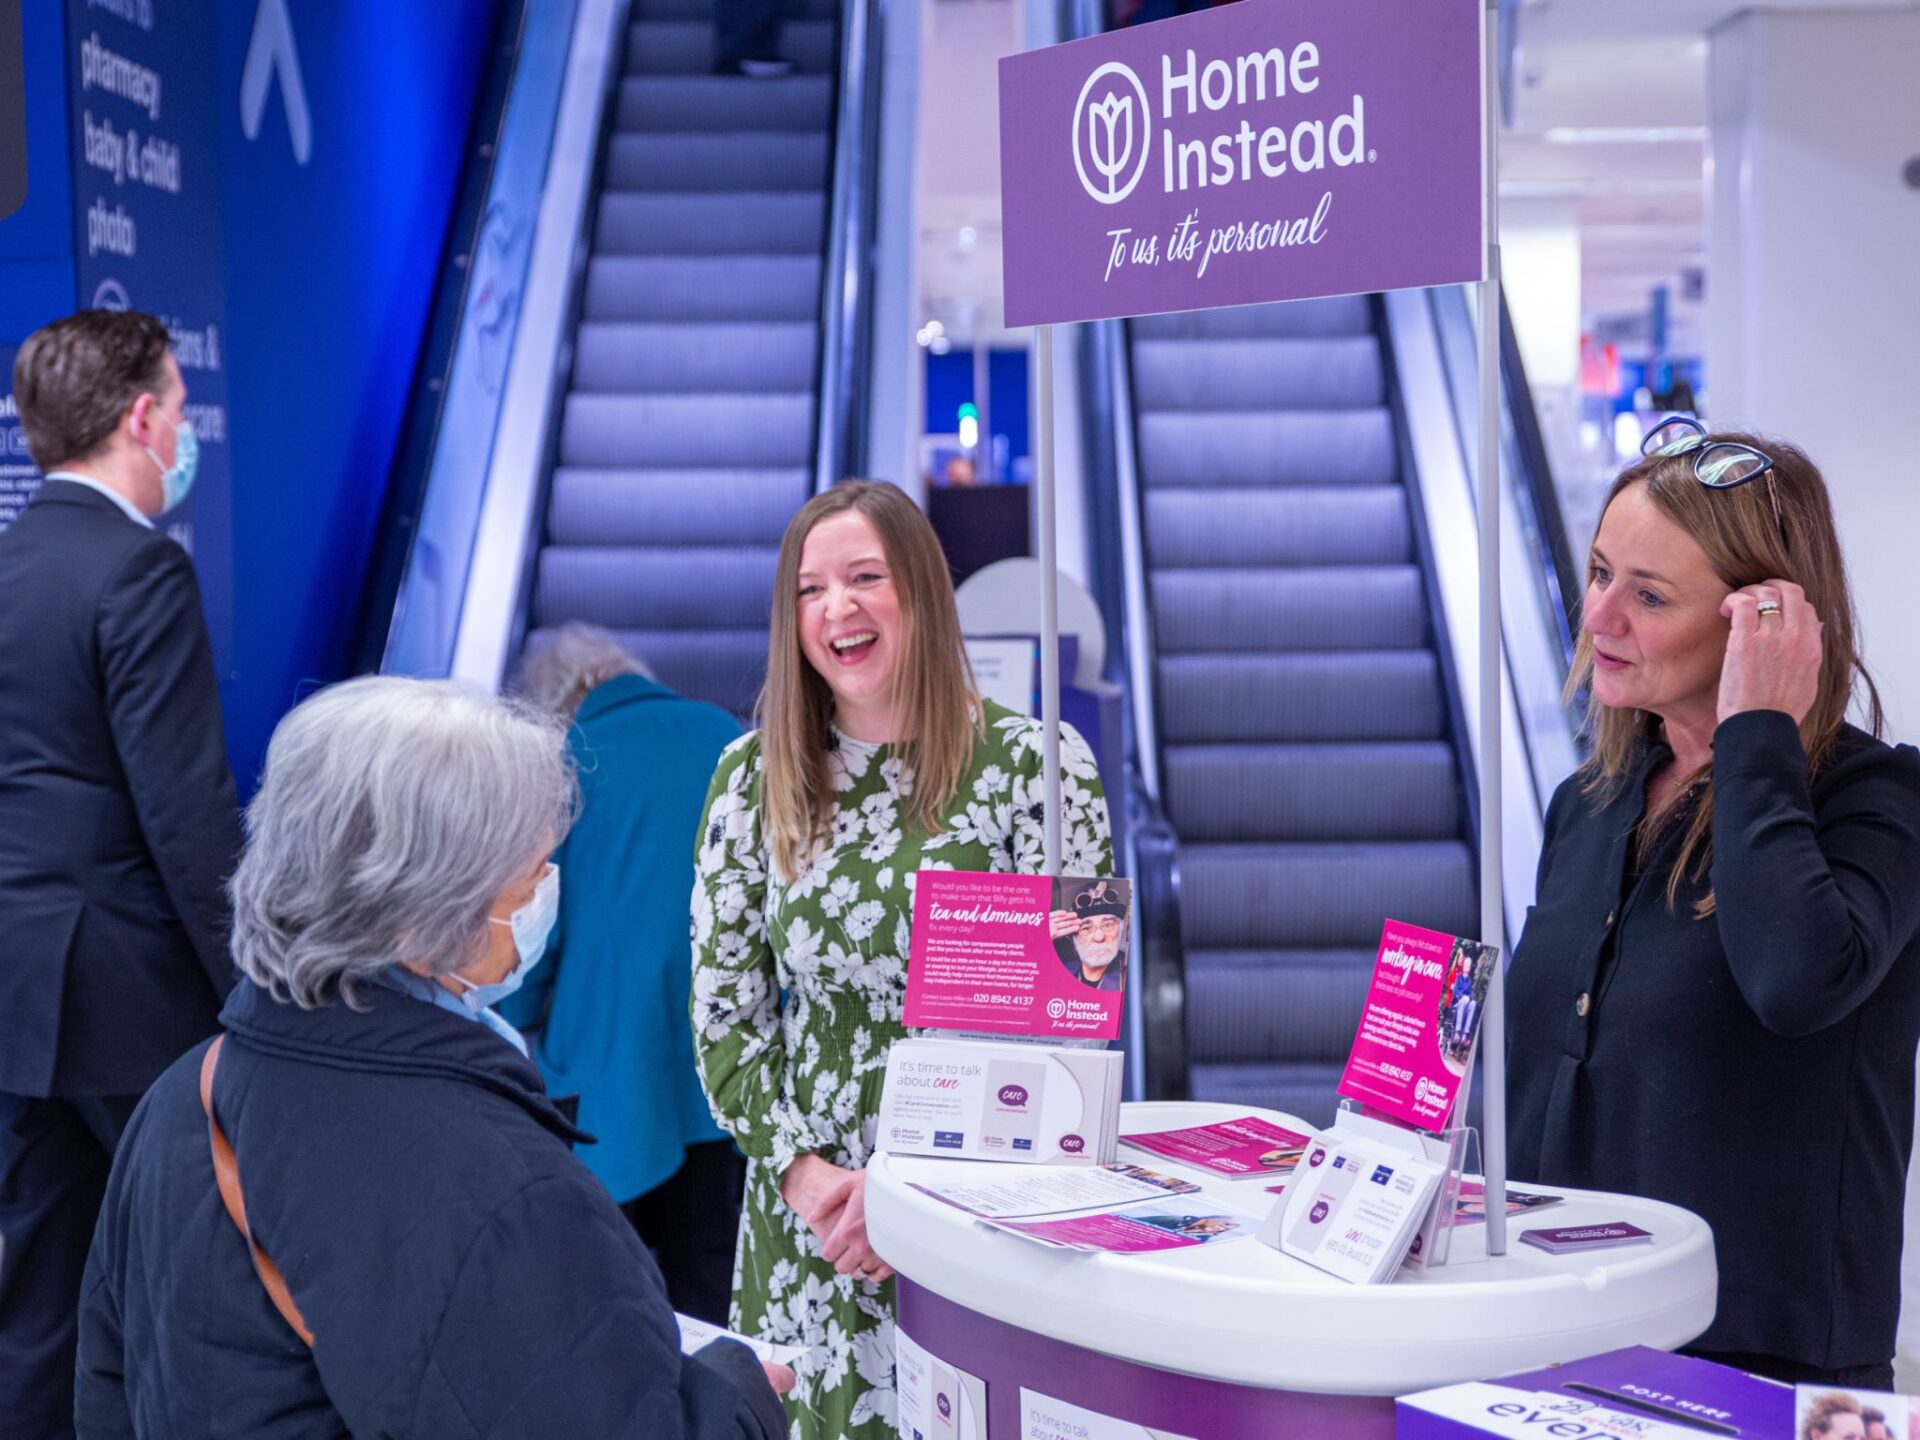 Home Instead franchisees welcomed to Boots UK’s over-60s rewards events